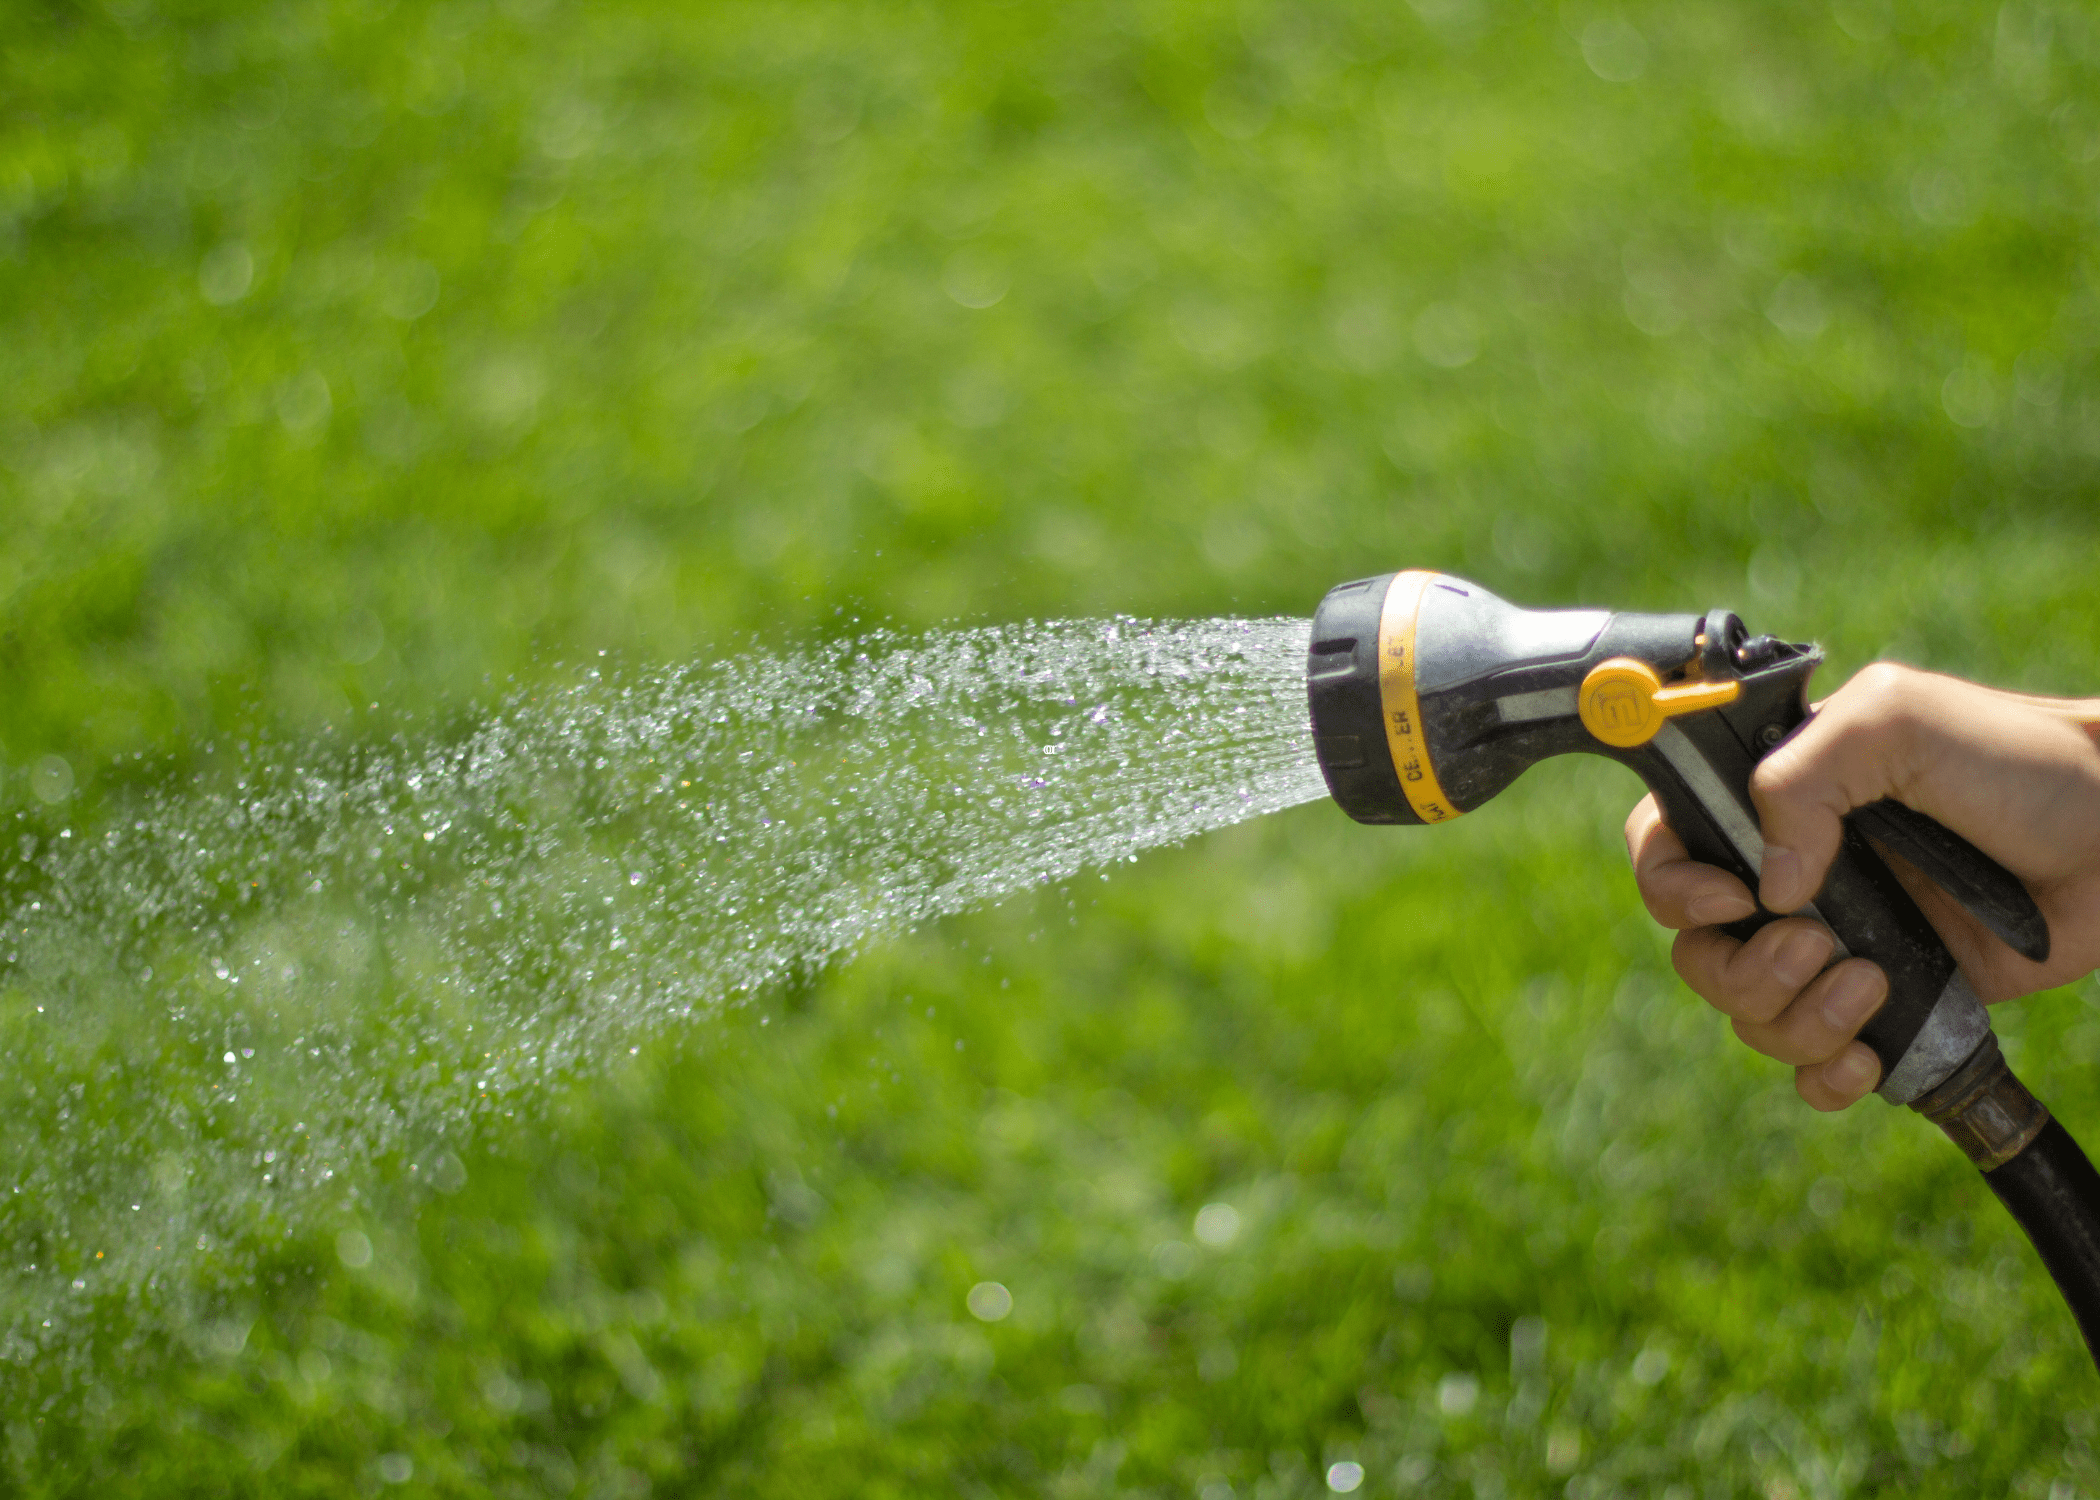 watering the lawn with a hose